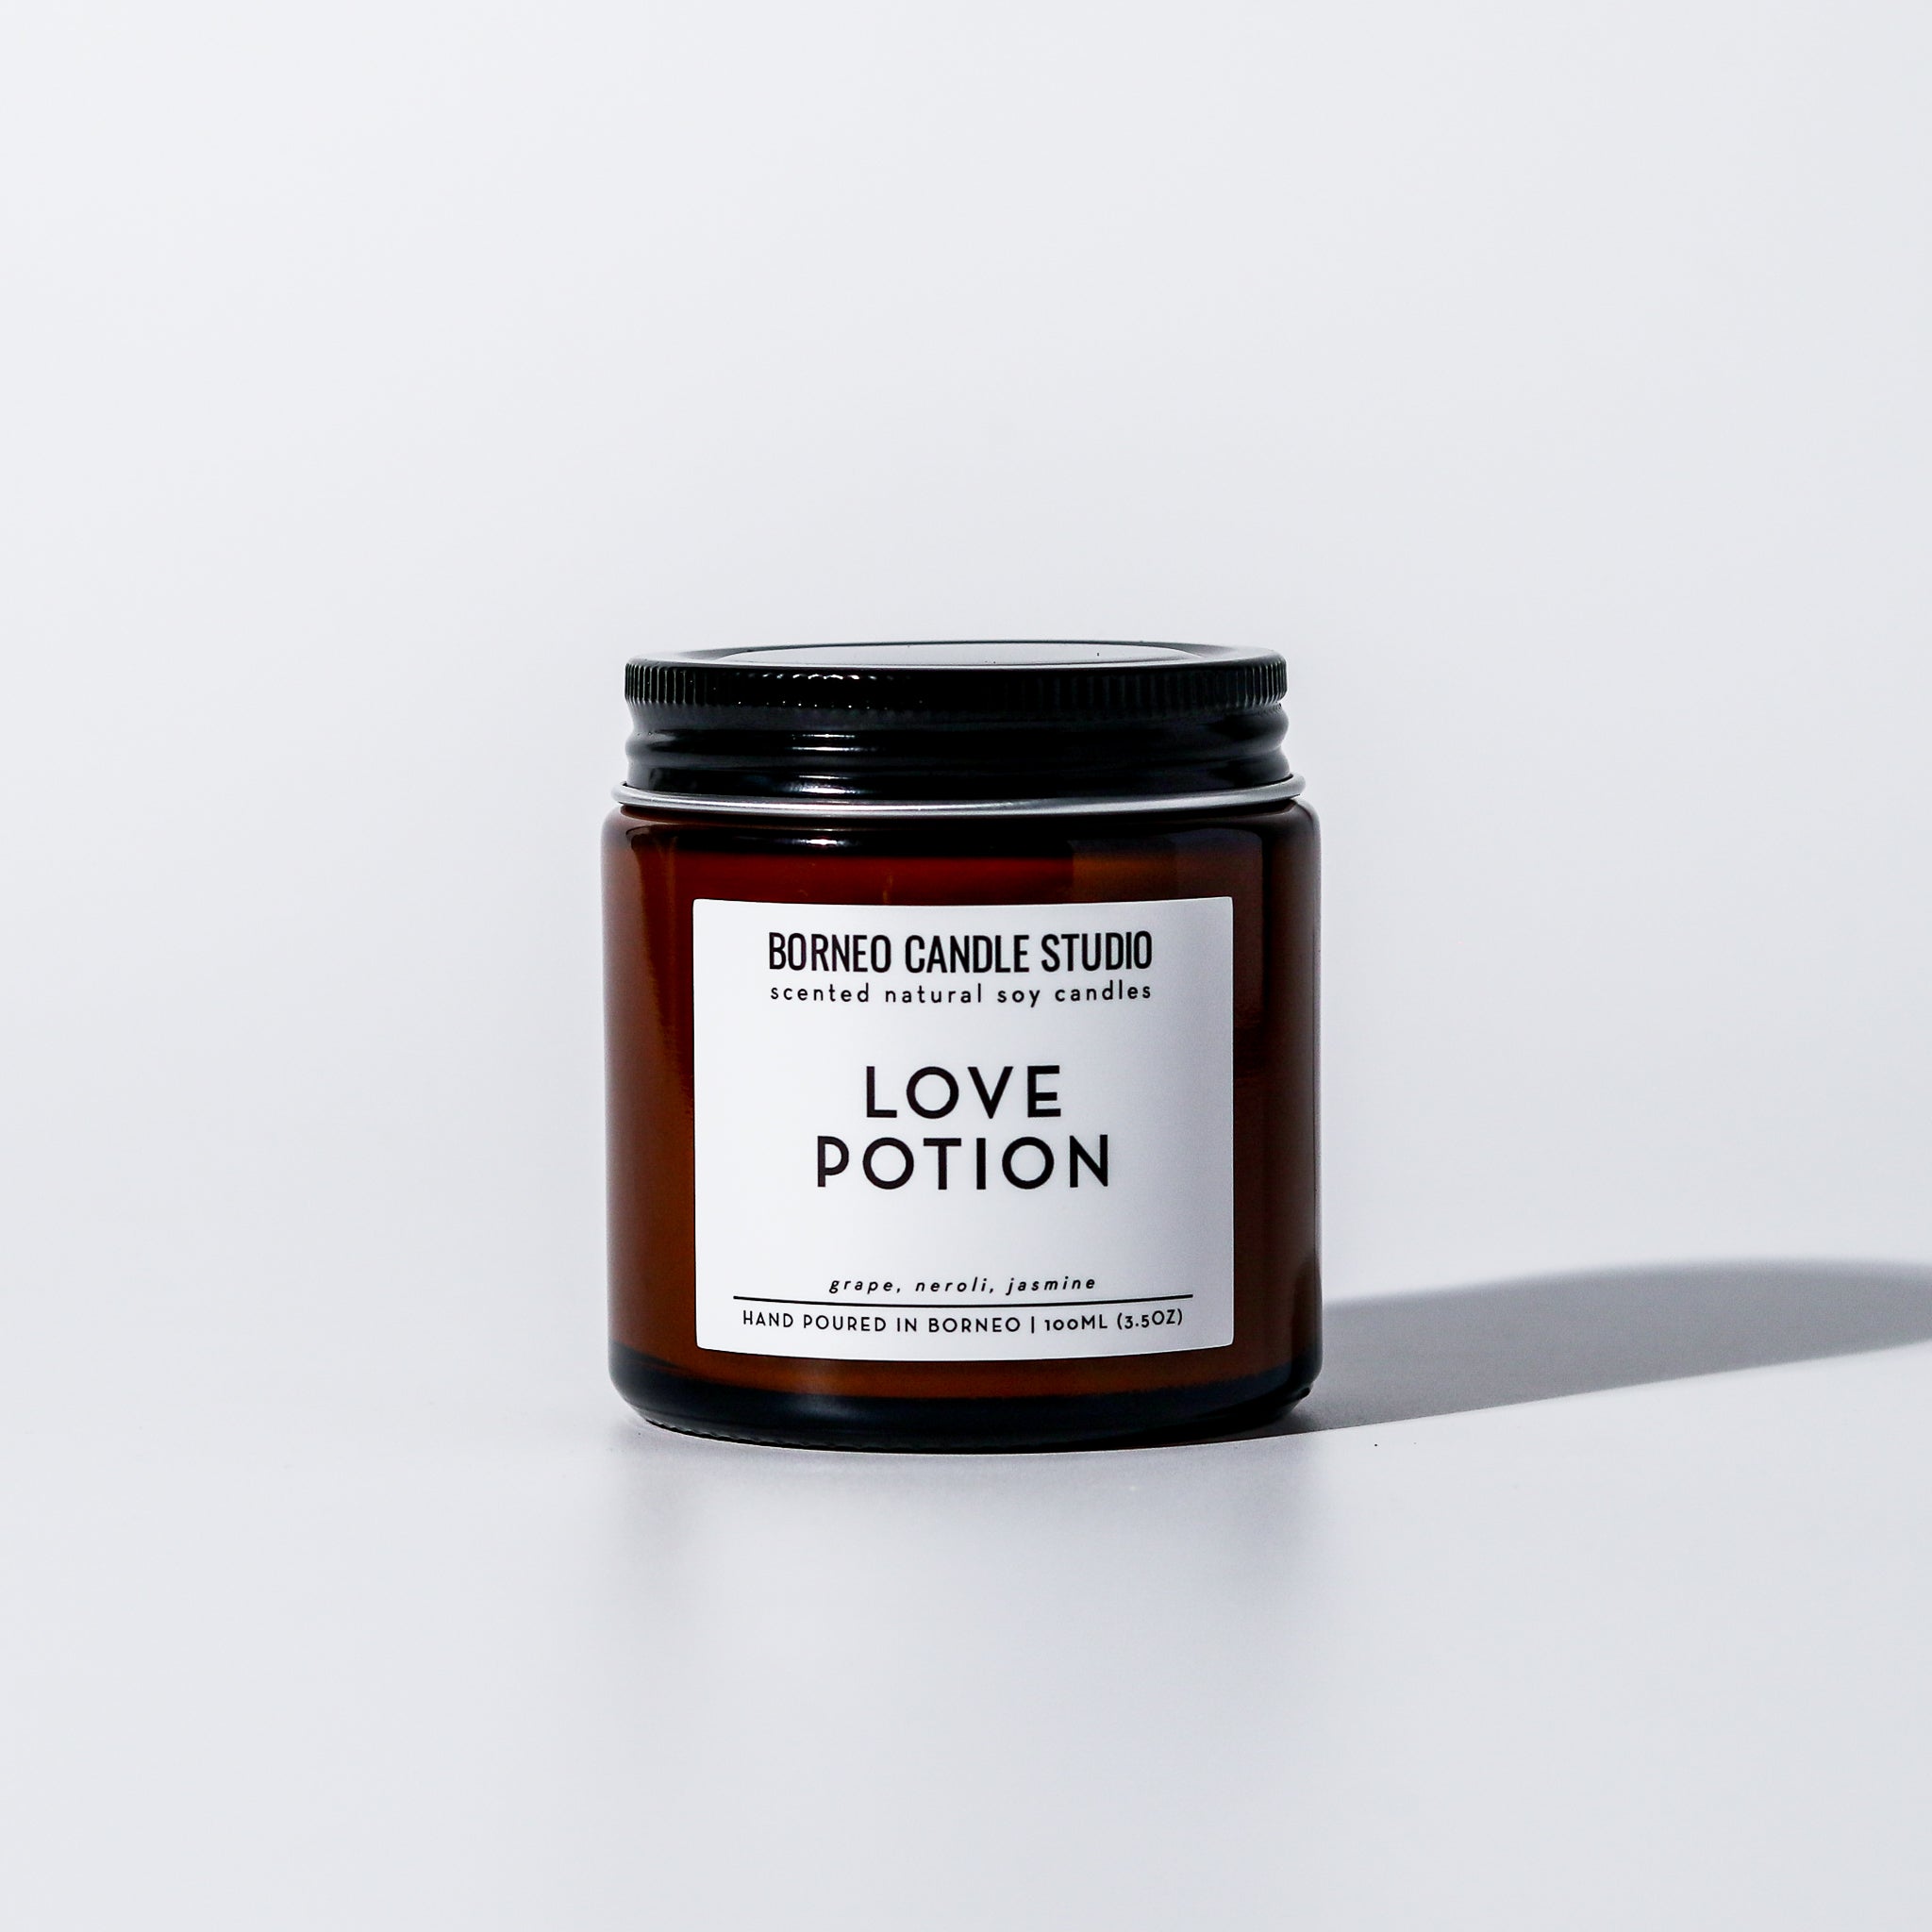 Love Potion Soy Candle - grape, neroli, jasmine scented candle in 3.5 oz amber glass jar